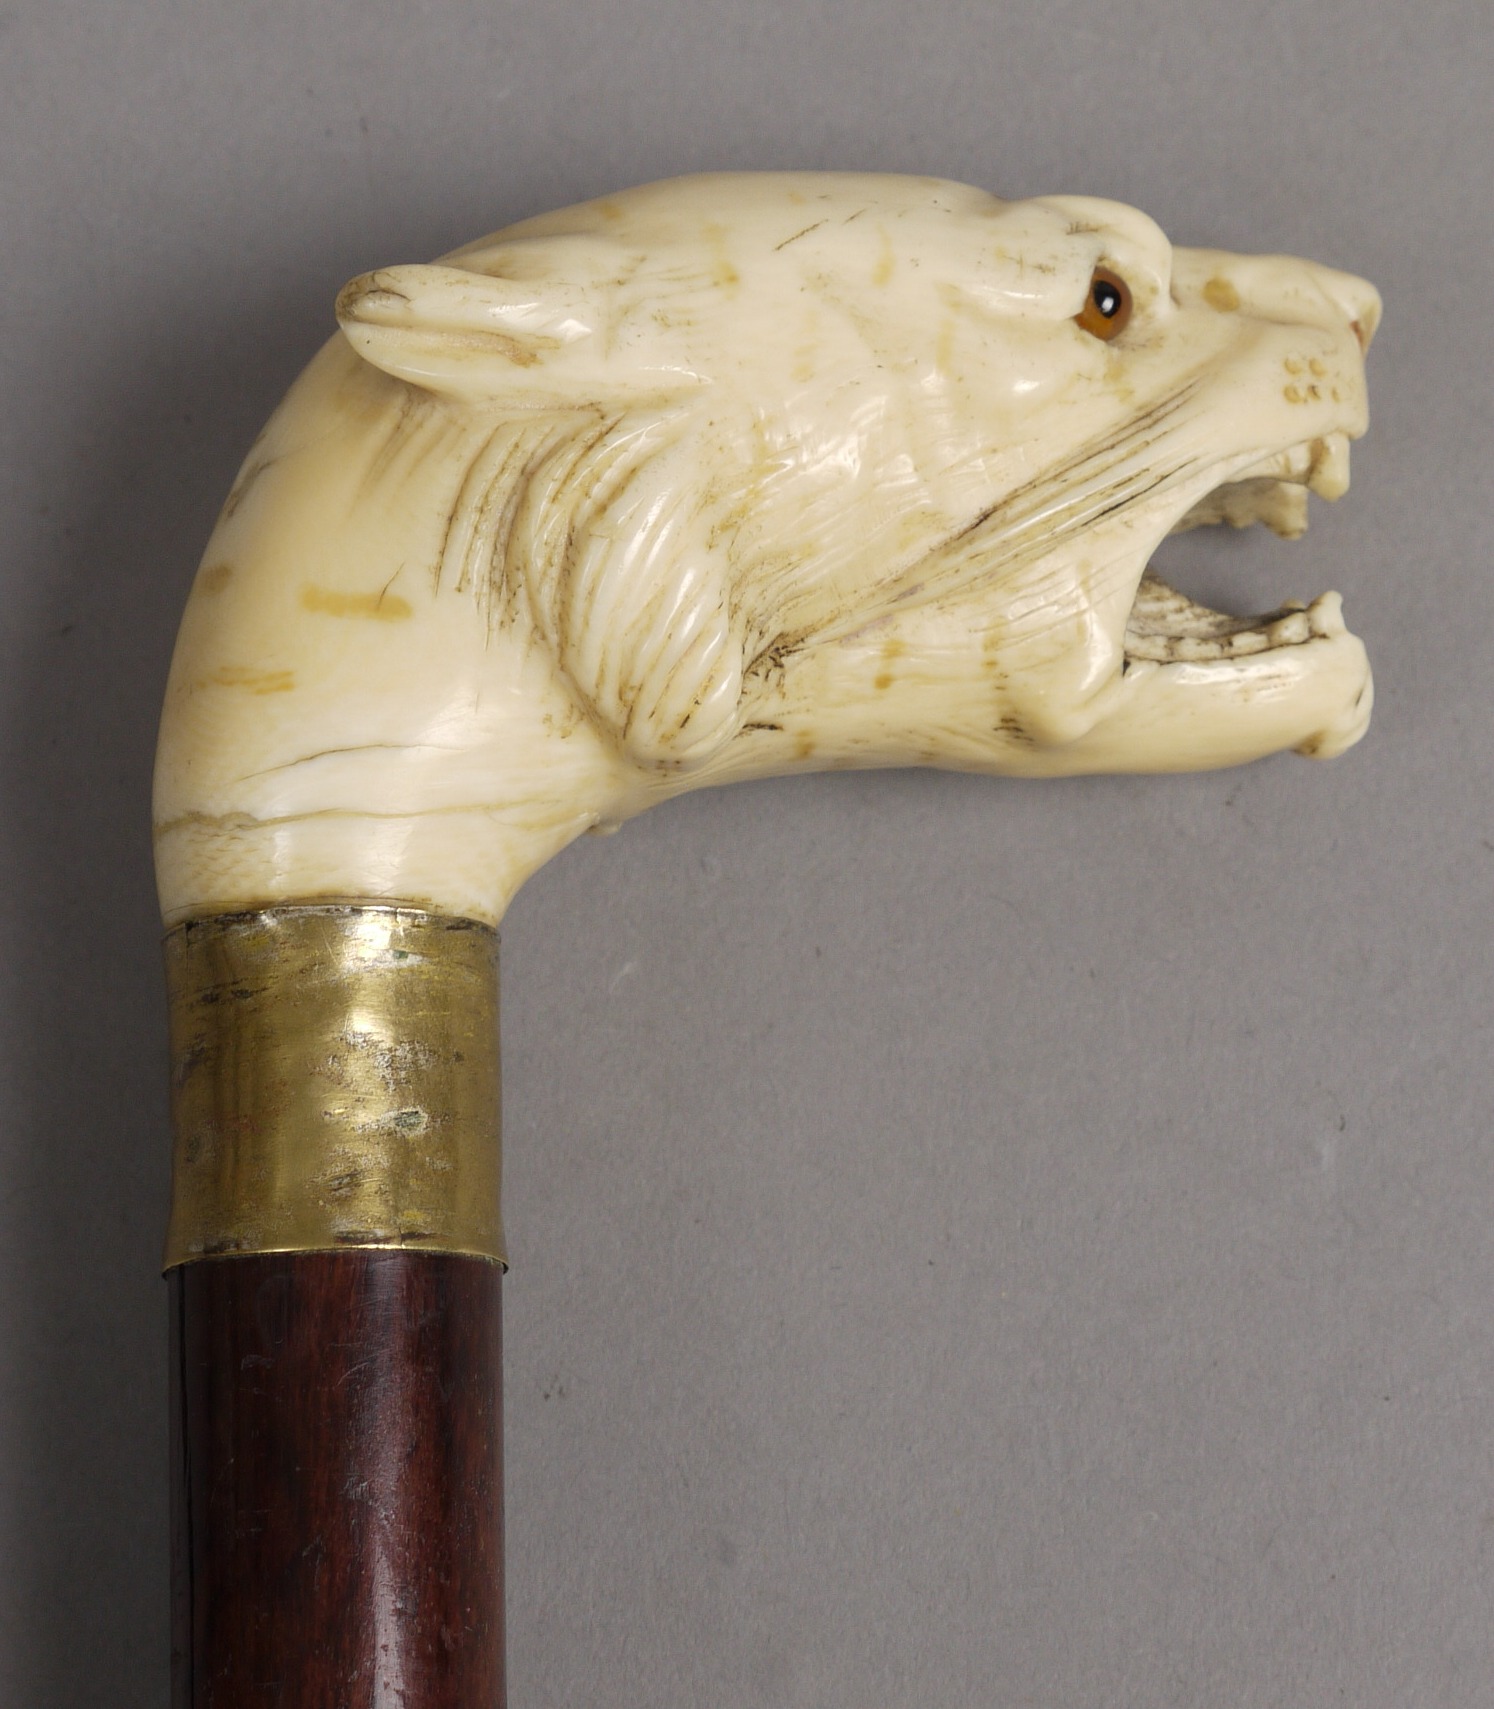 A VICTORIAN IVORY HANDLED MALACCA WALKING STICK, the handle finely carved as a snarling leopard's